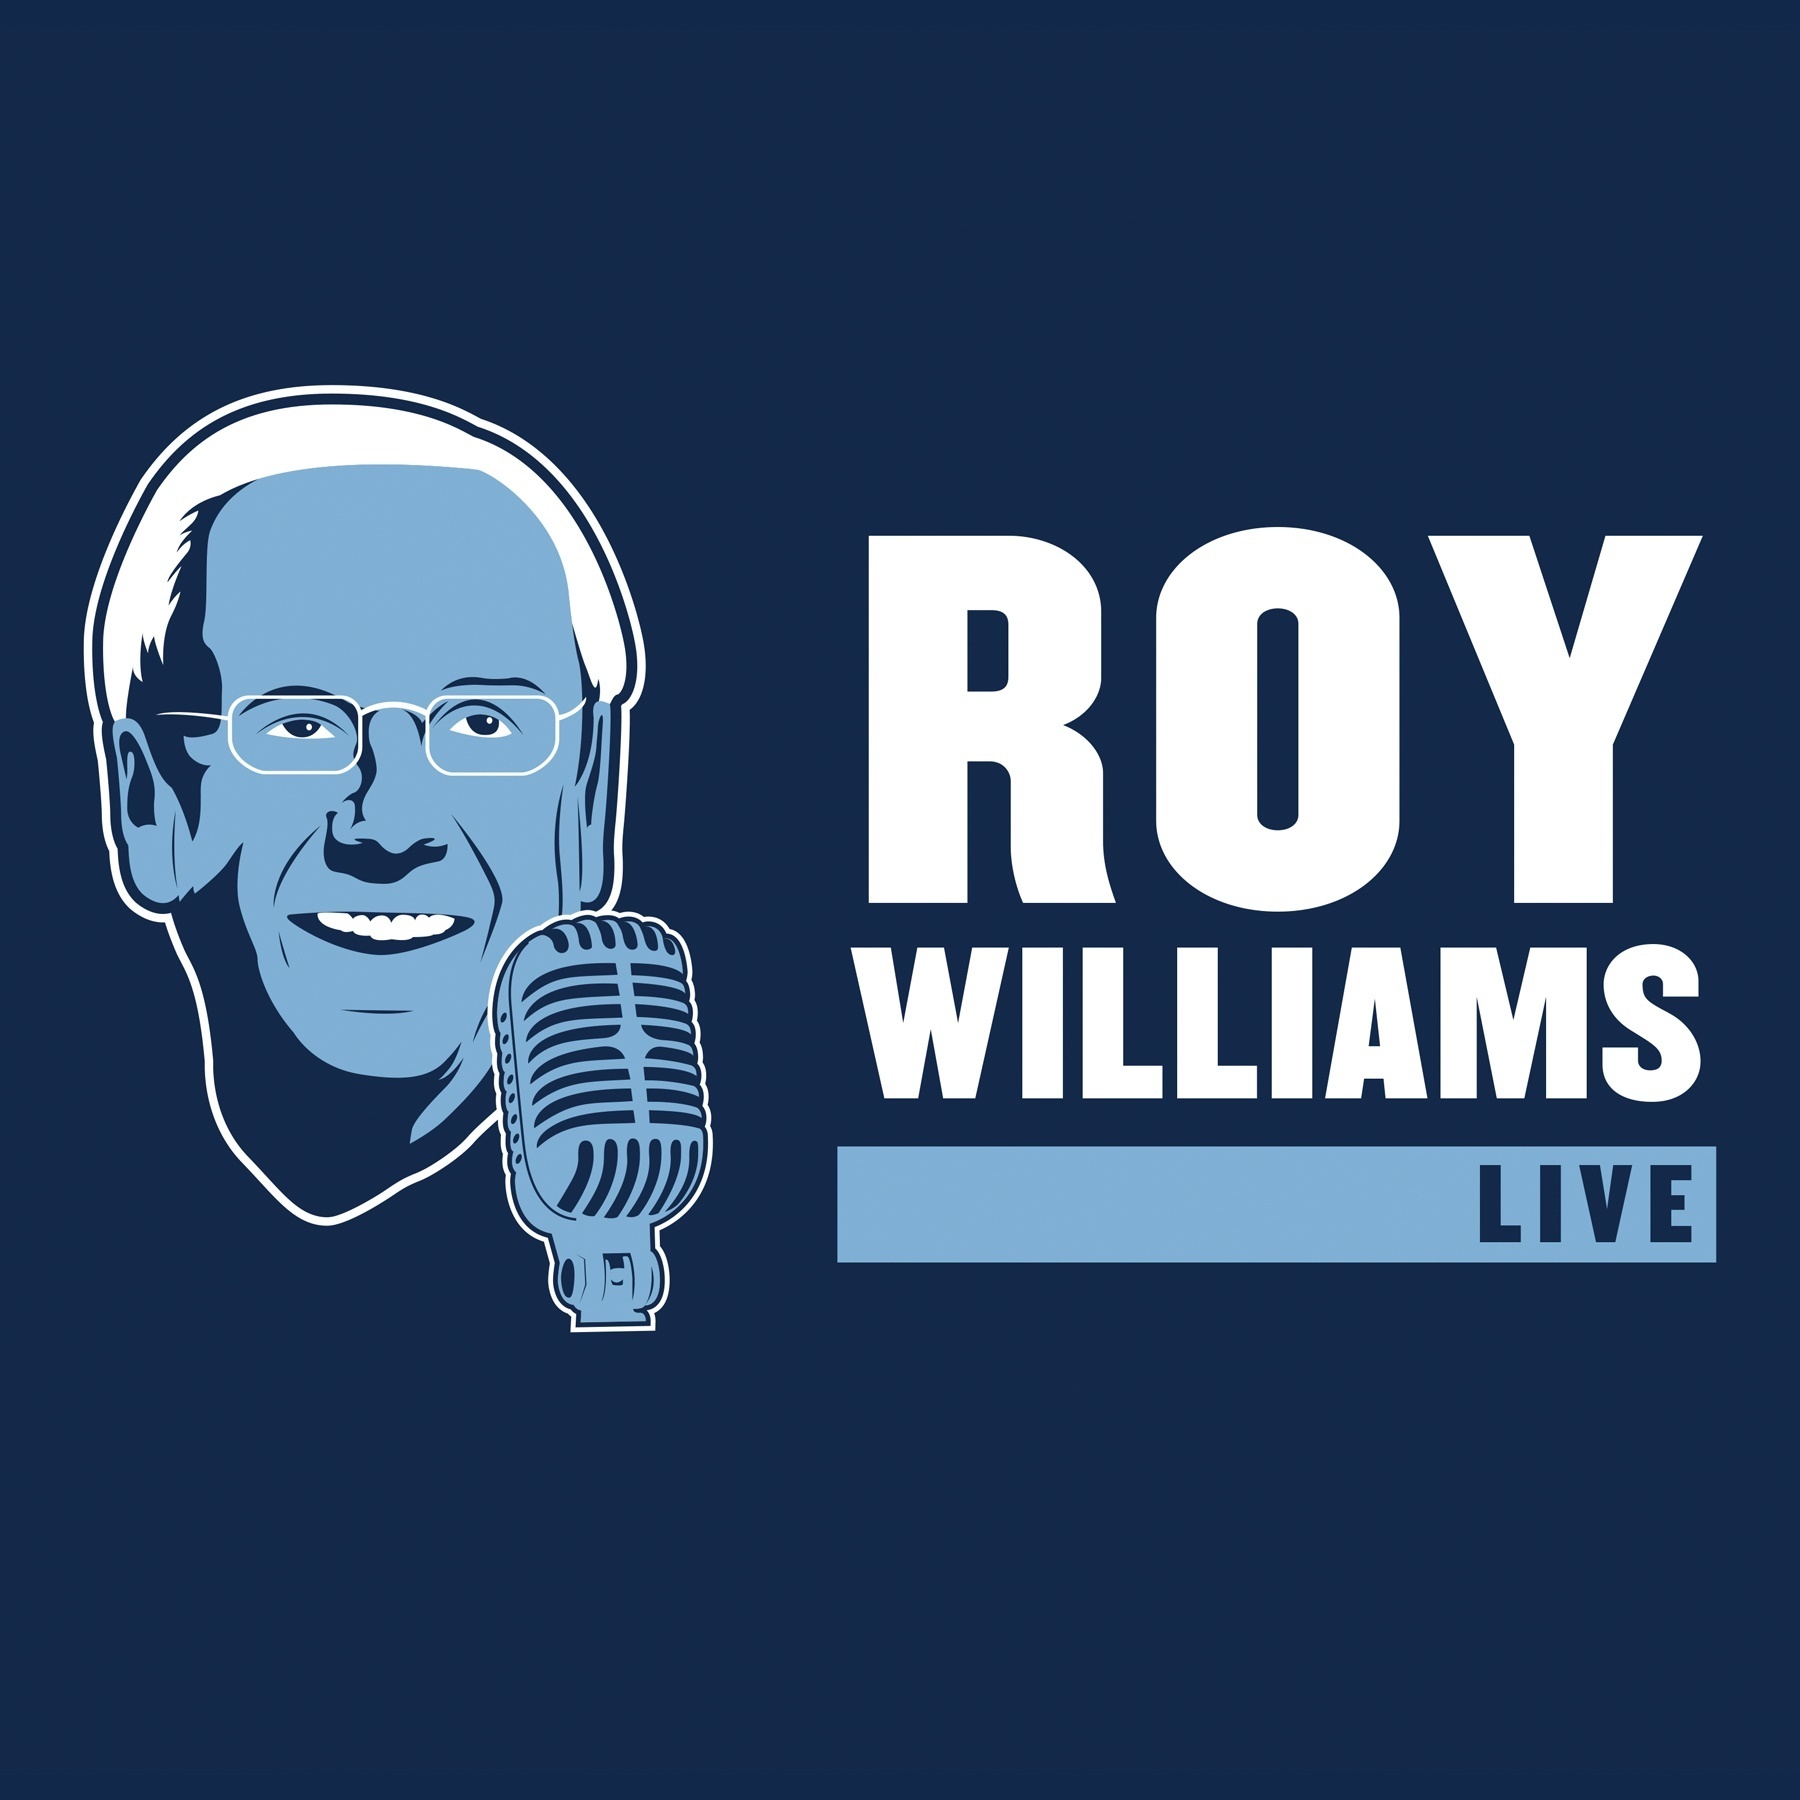 Roy Williams Live from 2-5-18